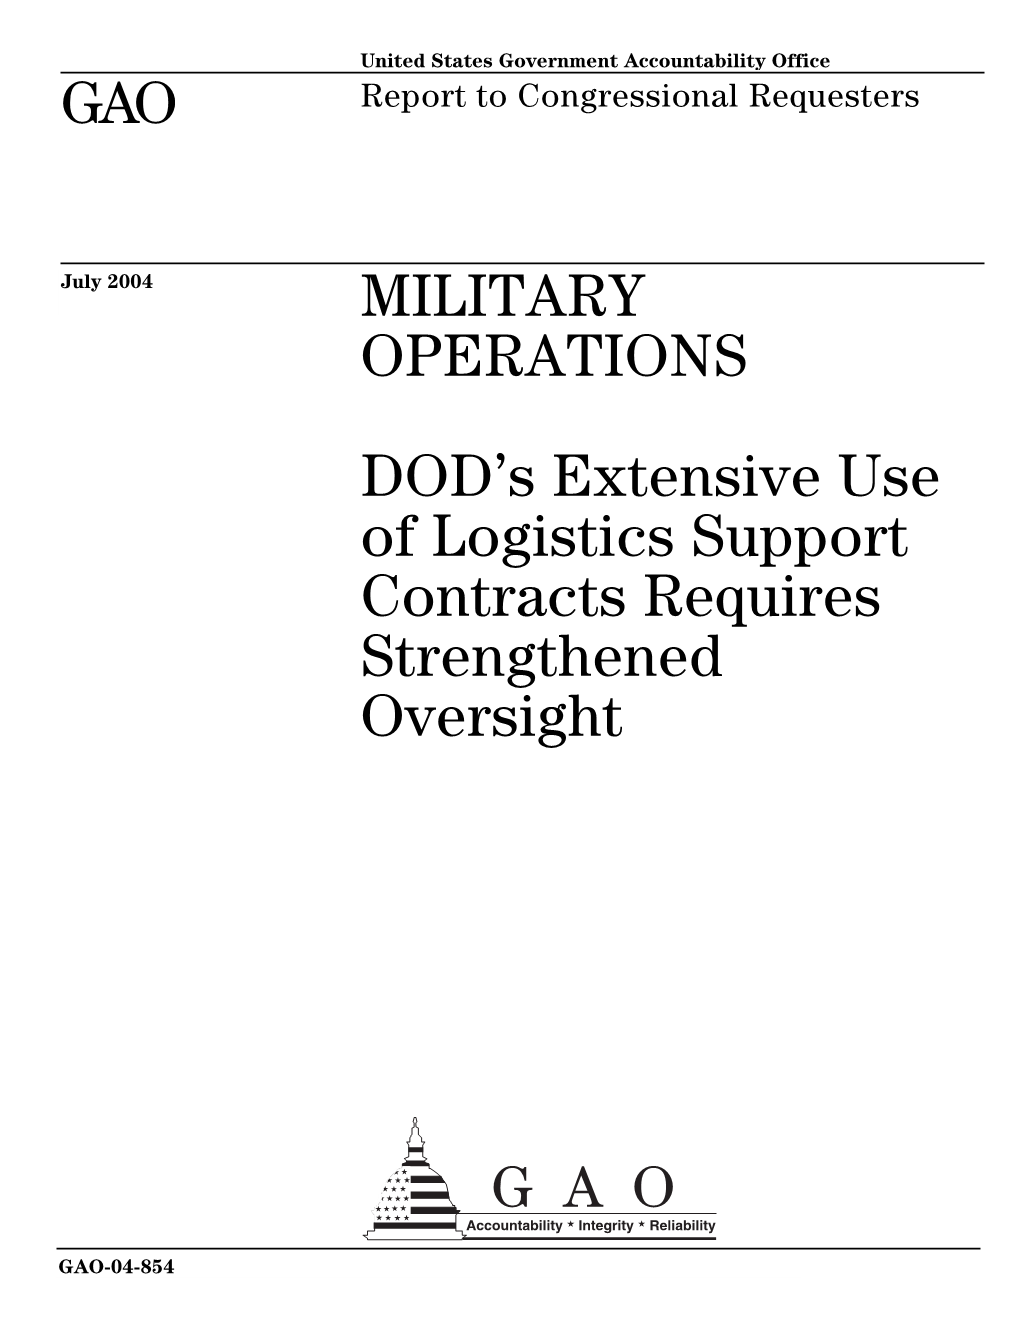 GAO-04-854 Military Operations: DOD's Extensive Use of Logistics